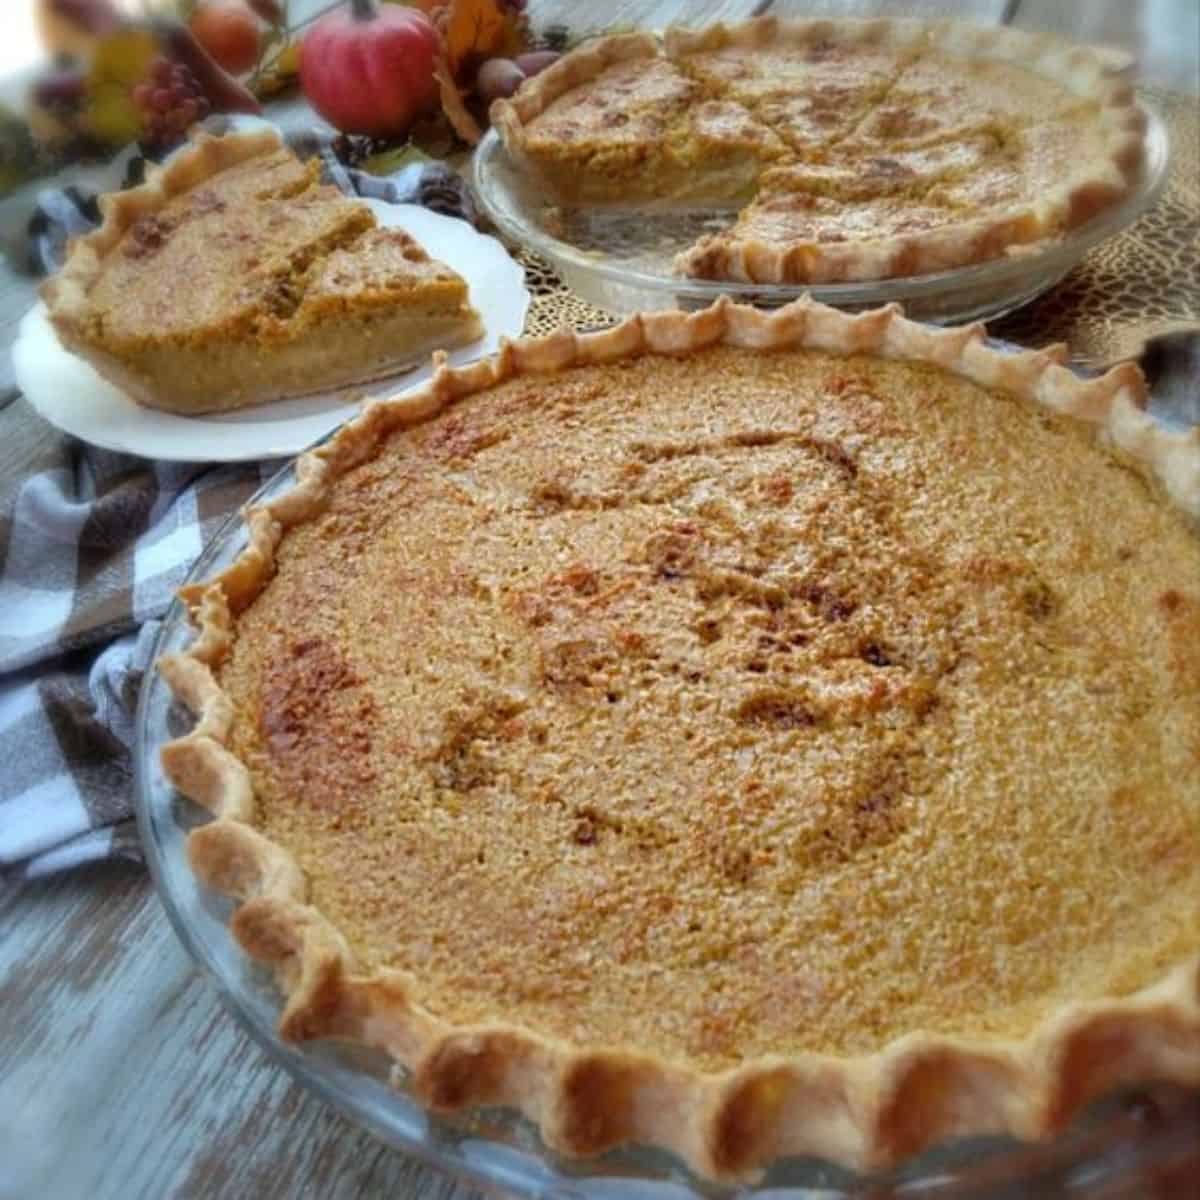 9" Amish pumpkin custard pie, a plate with a slice, and the remaining pie in the background.